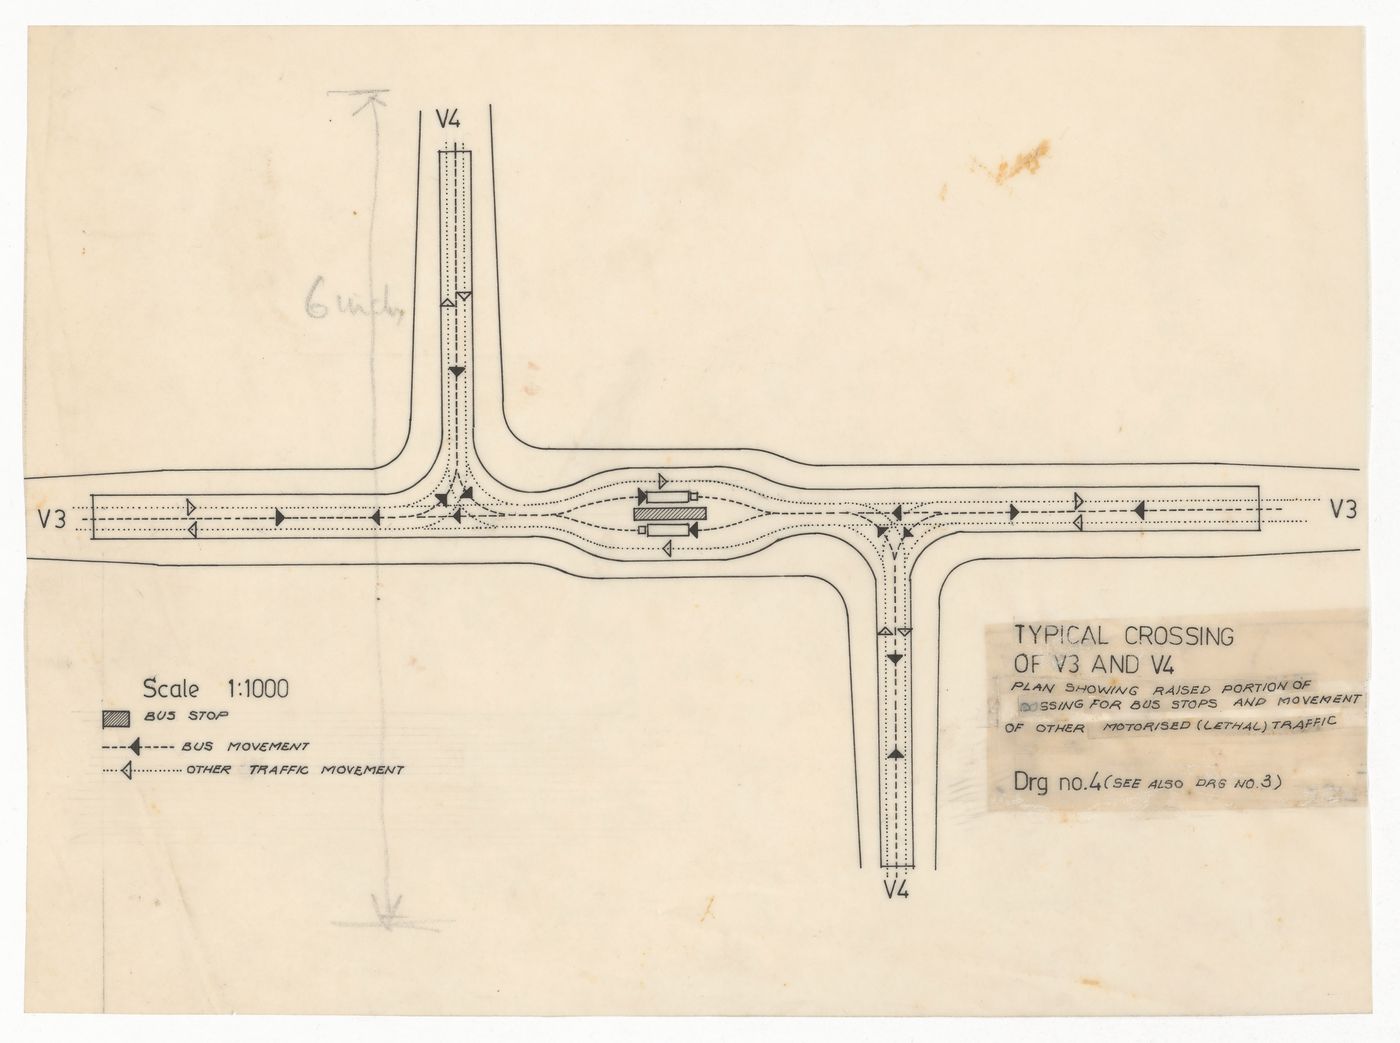 Road plan showing typical crossings of road types V3 and V4 for Linear city, Chandigarh, India
